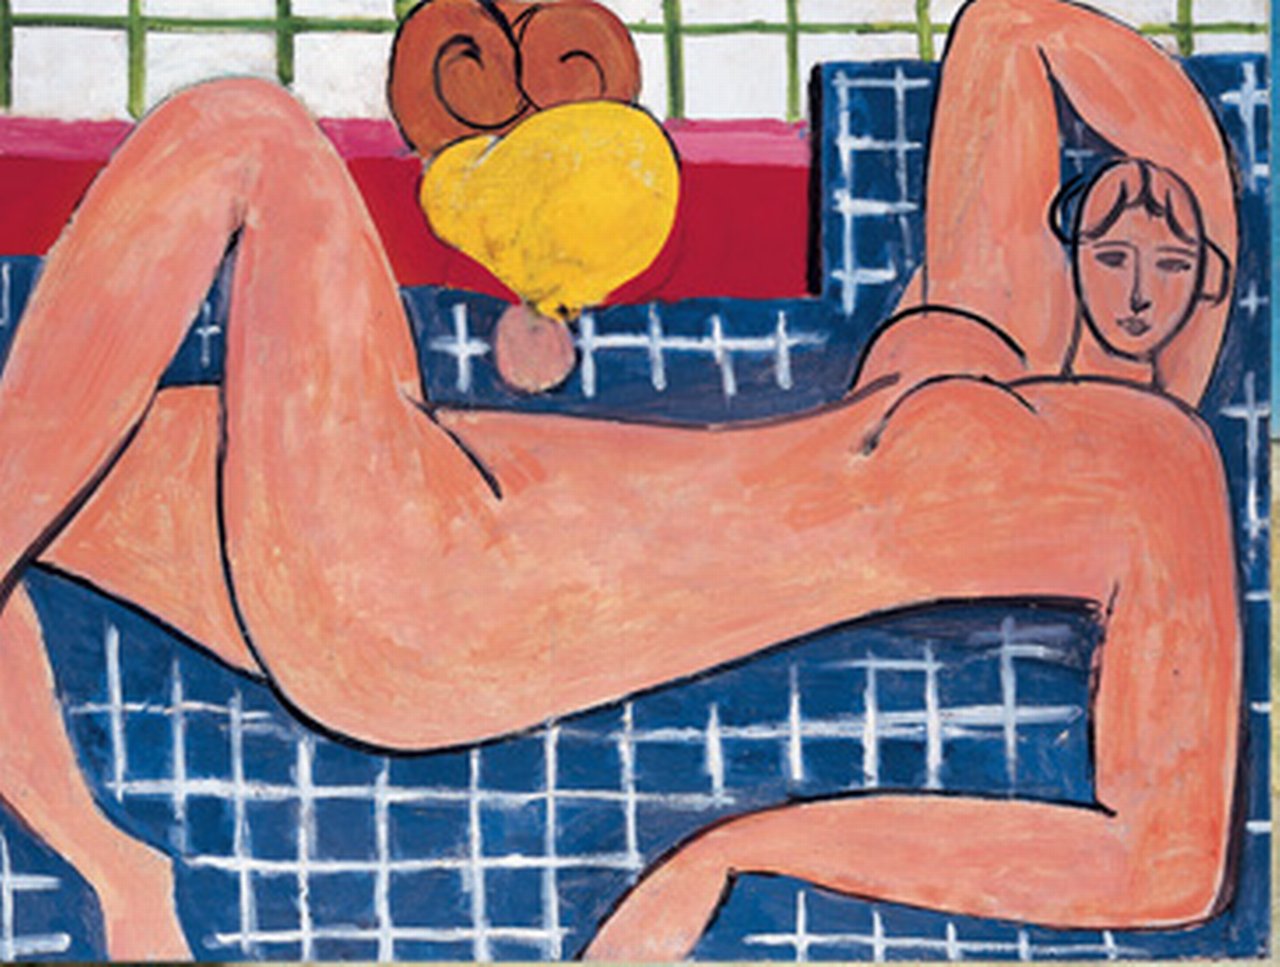 Henri Matisse, Large Reclining Nude, 1935.  Oil on canvas.